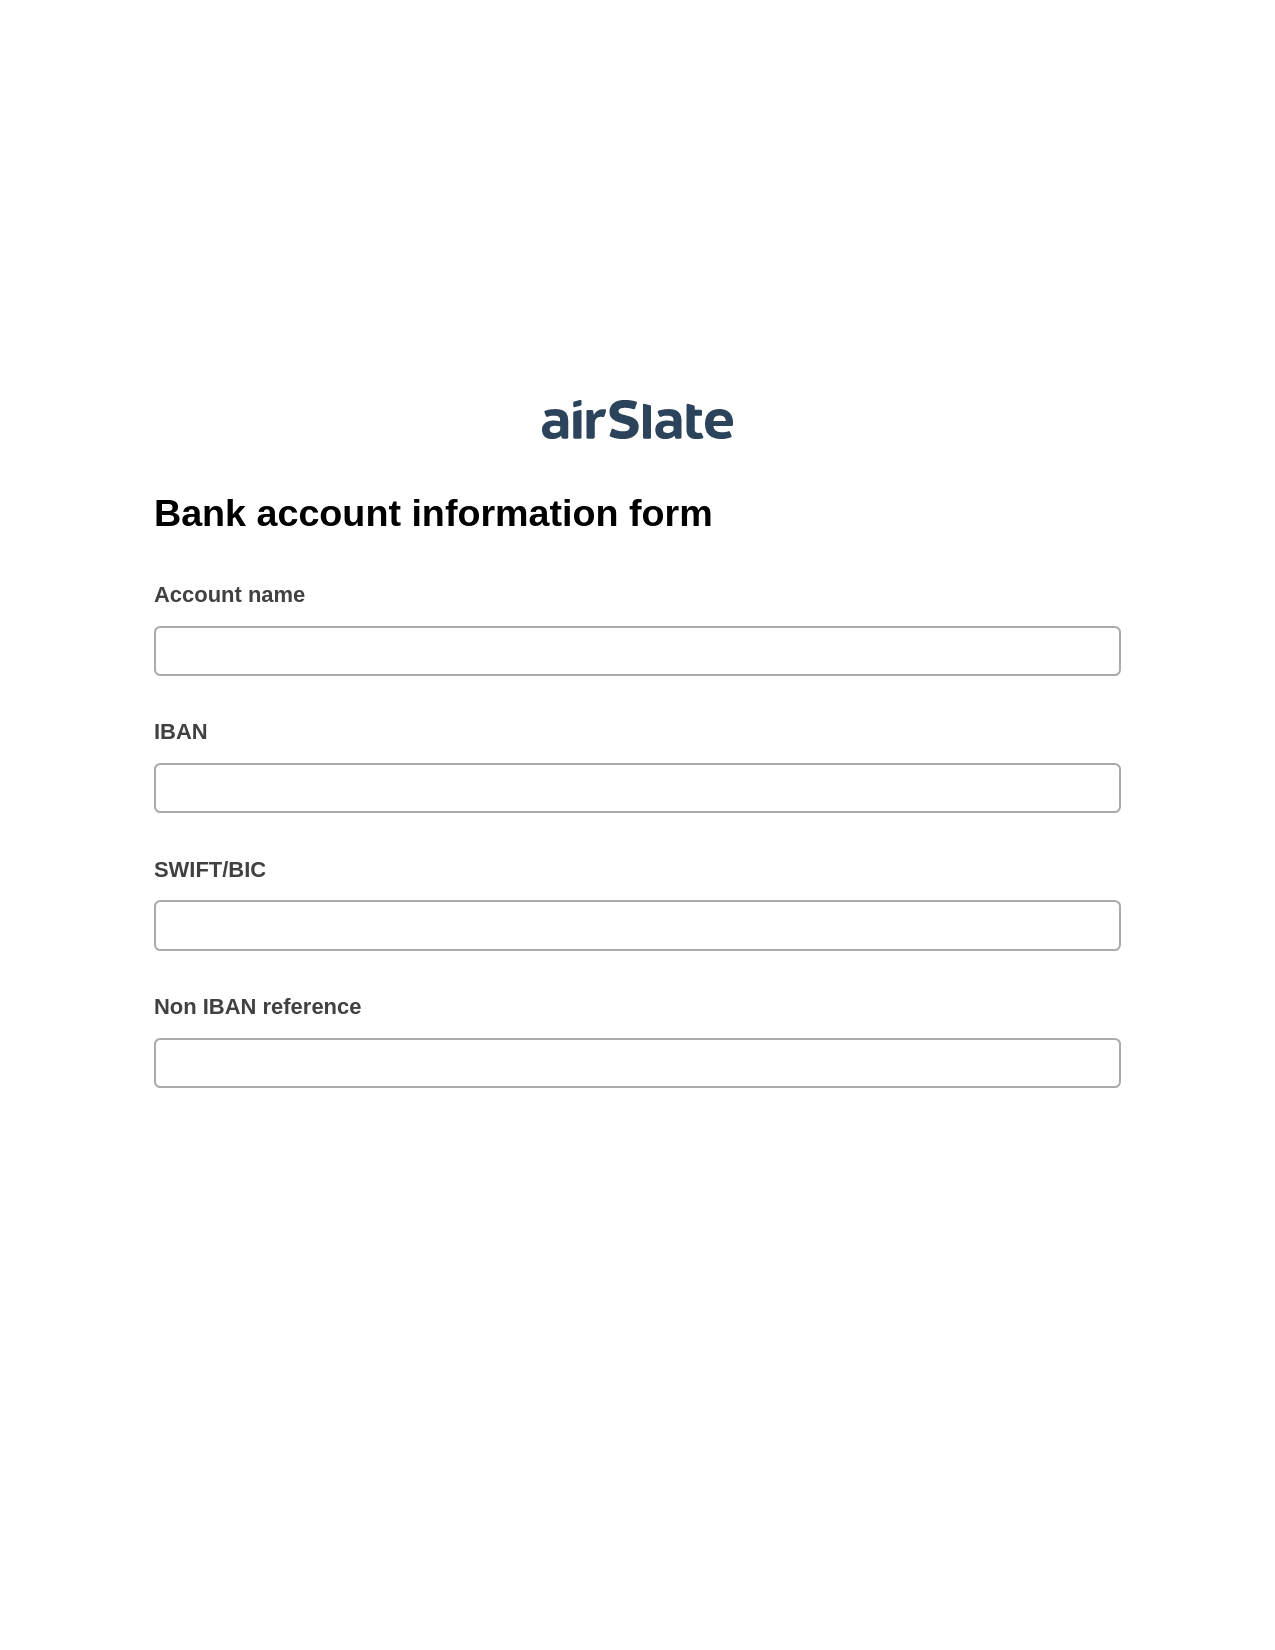 Bank account information form Pre-fill from CSV File Dropdown Options Bot, Export to MS Dynamics 365 Bot, Export to Excel 365 Bot